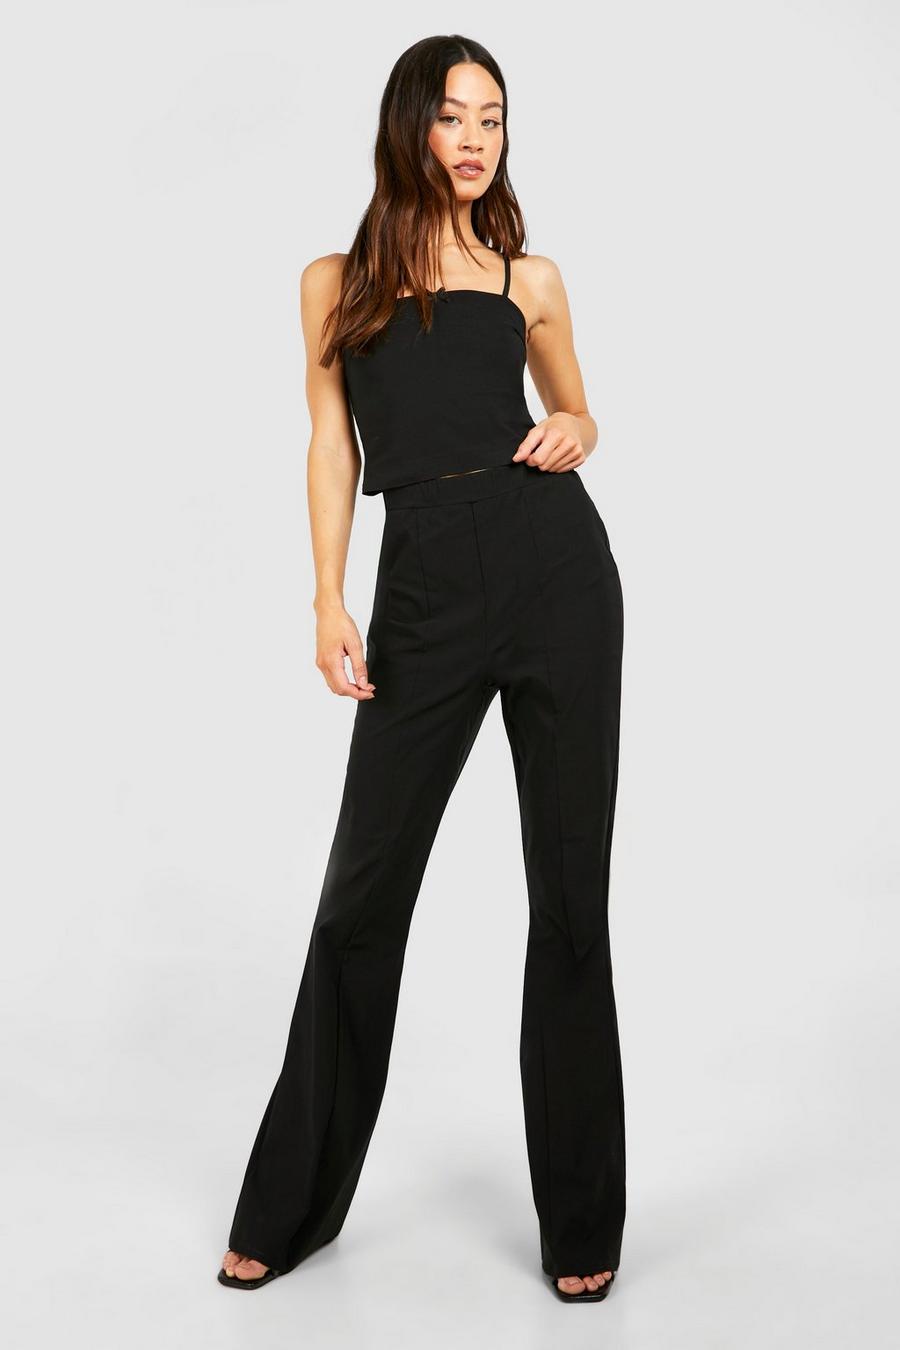 Black Tall Bengaline Stretch Fit And Flare Pants image number 1